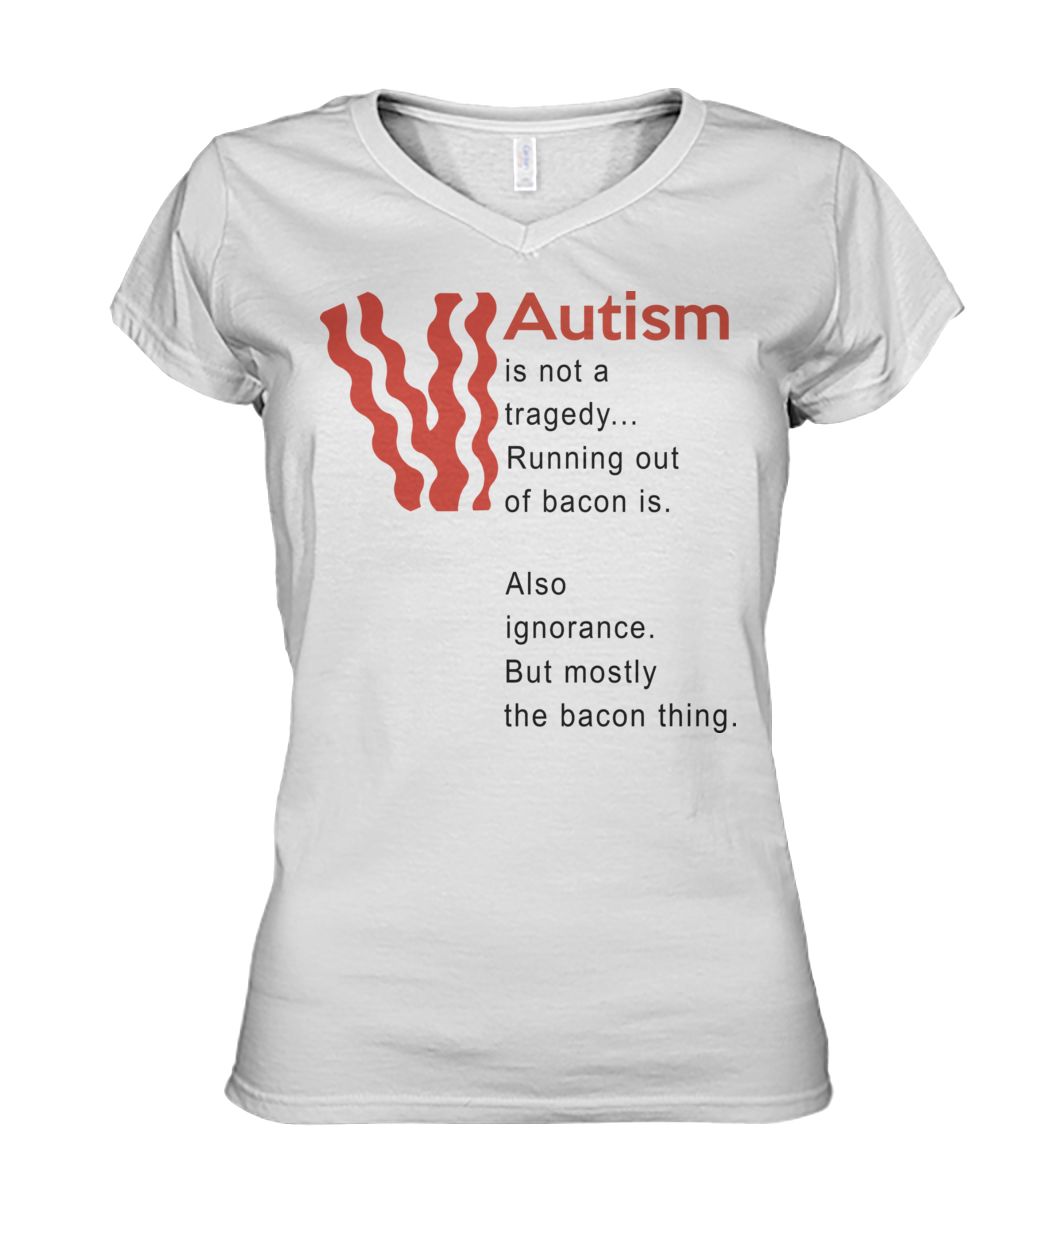 Autism is not a tragedy running out of bacon is women's v-neck